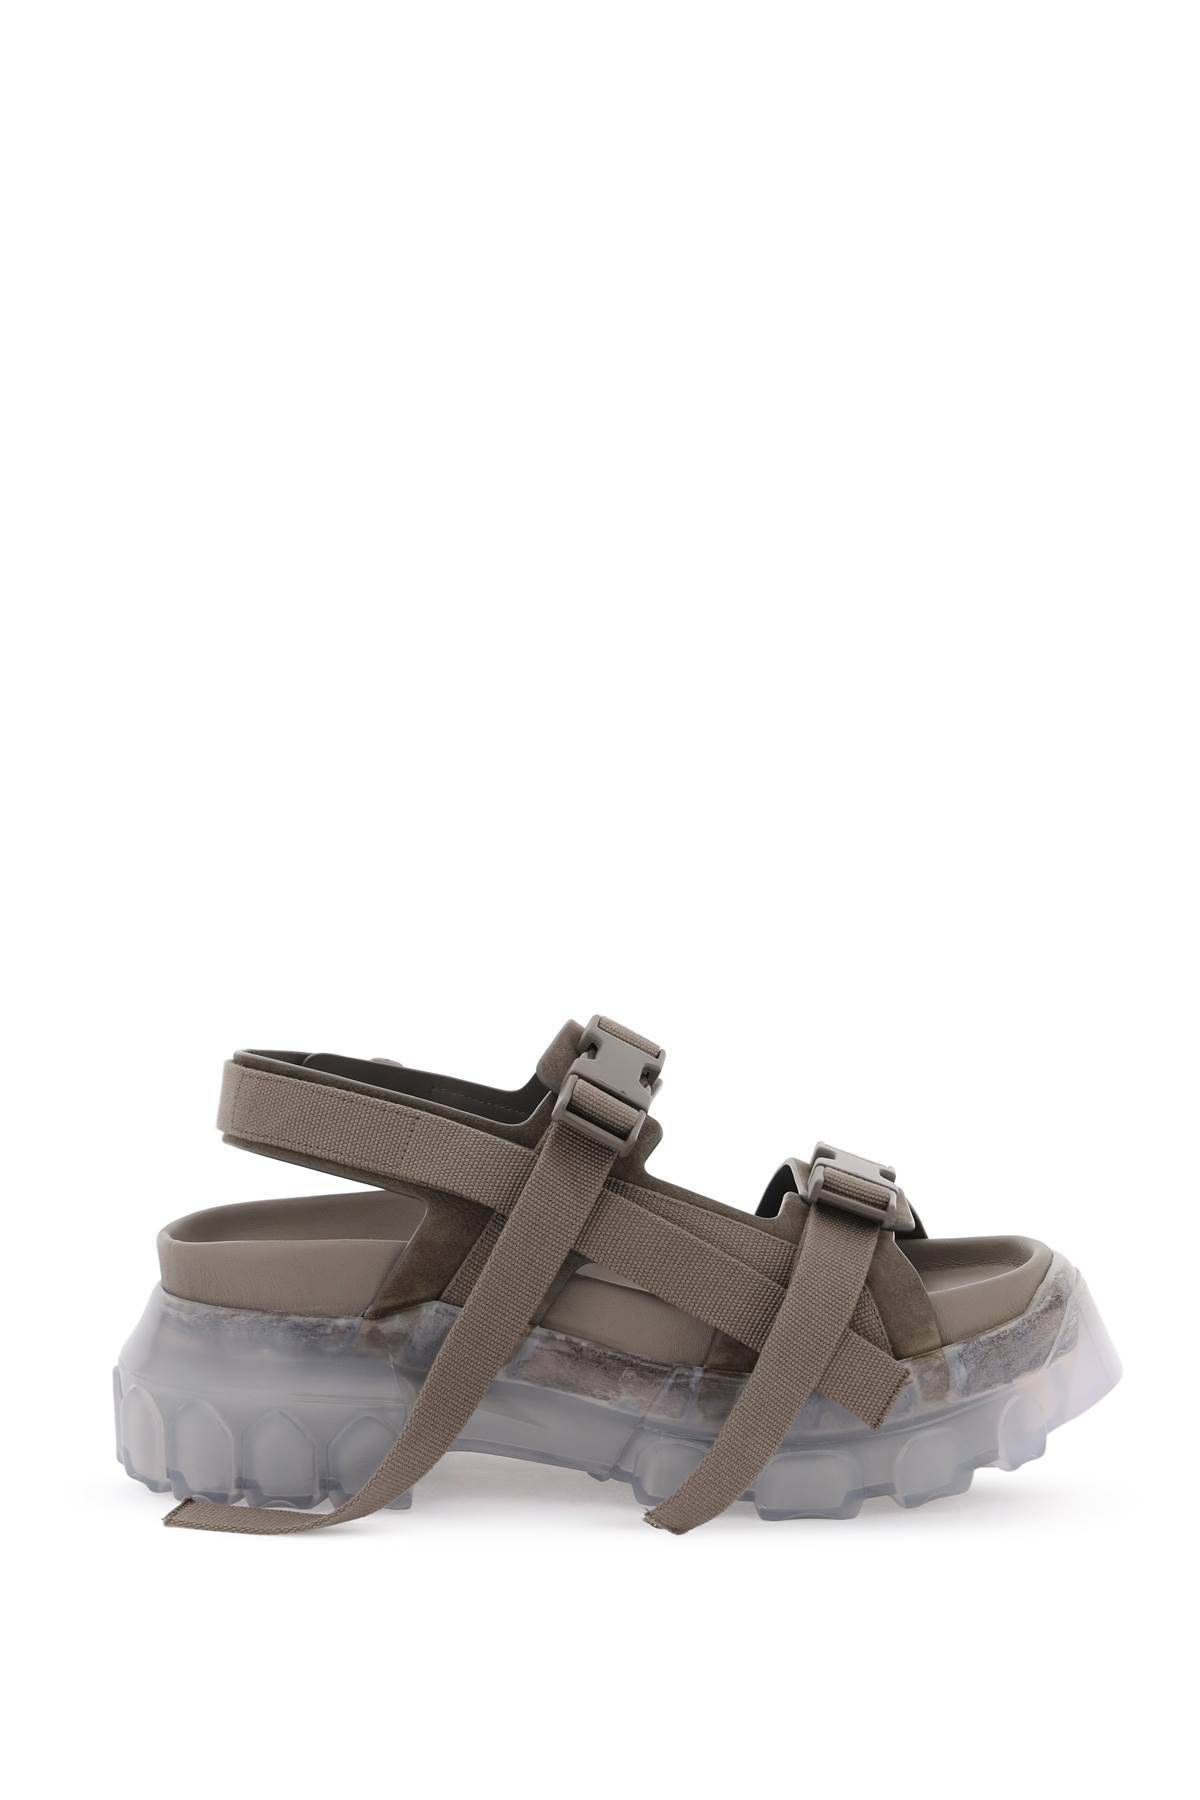 Rick Owens RICK OWENS sandals with tractor sole